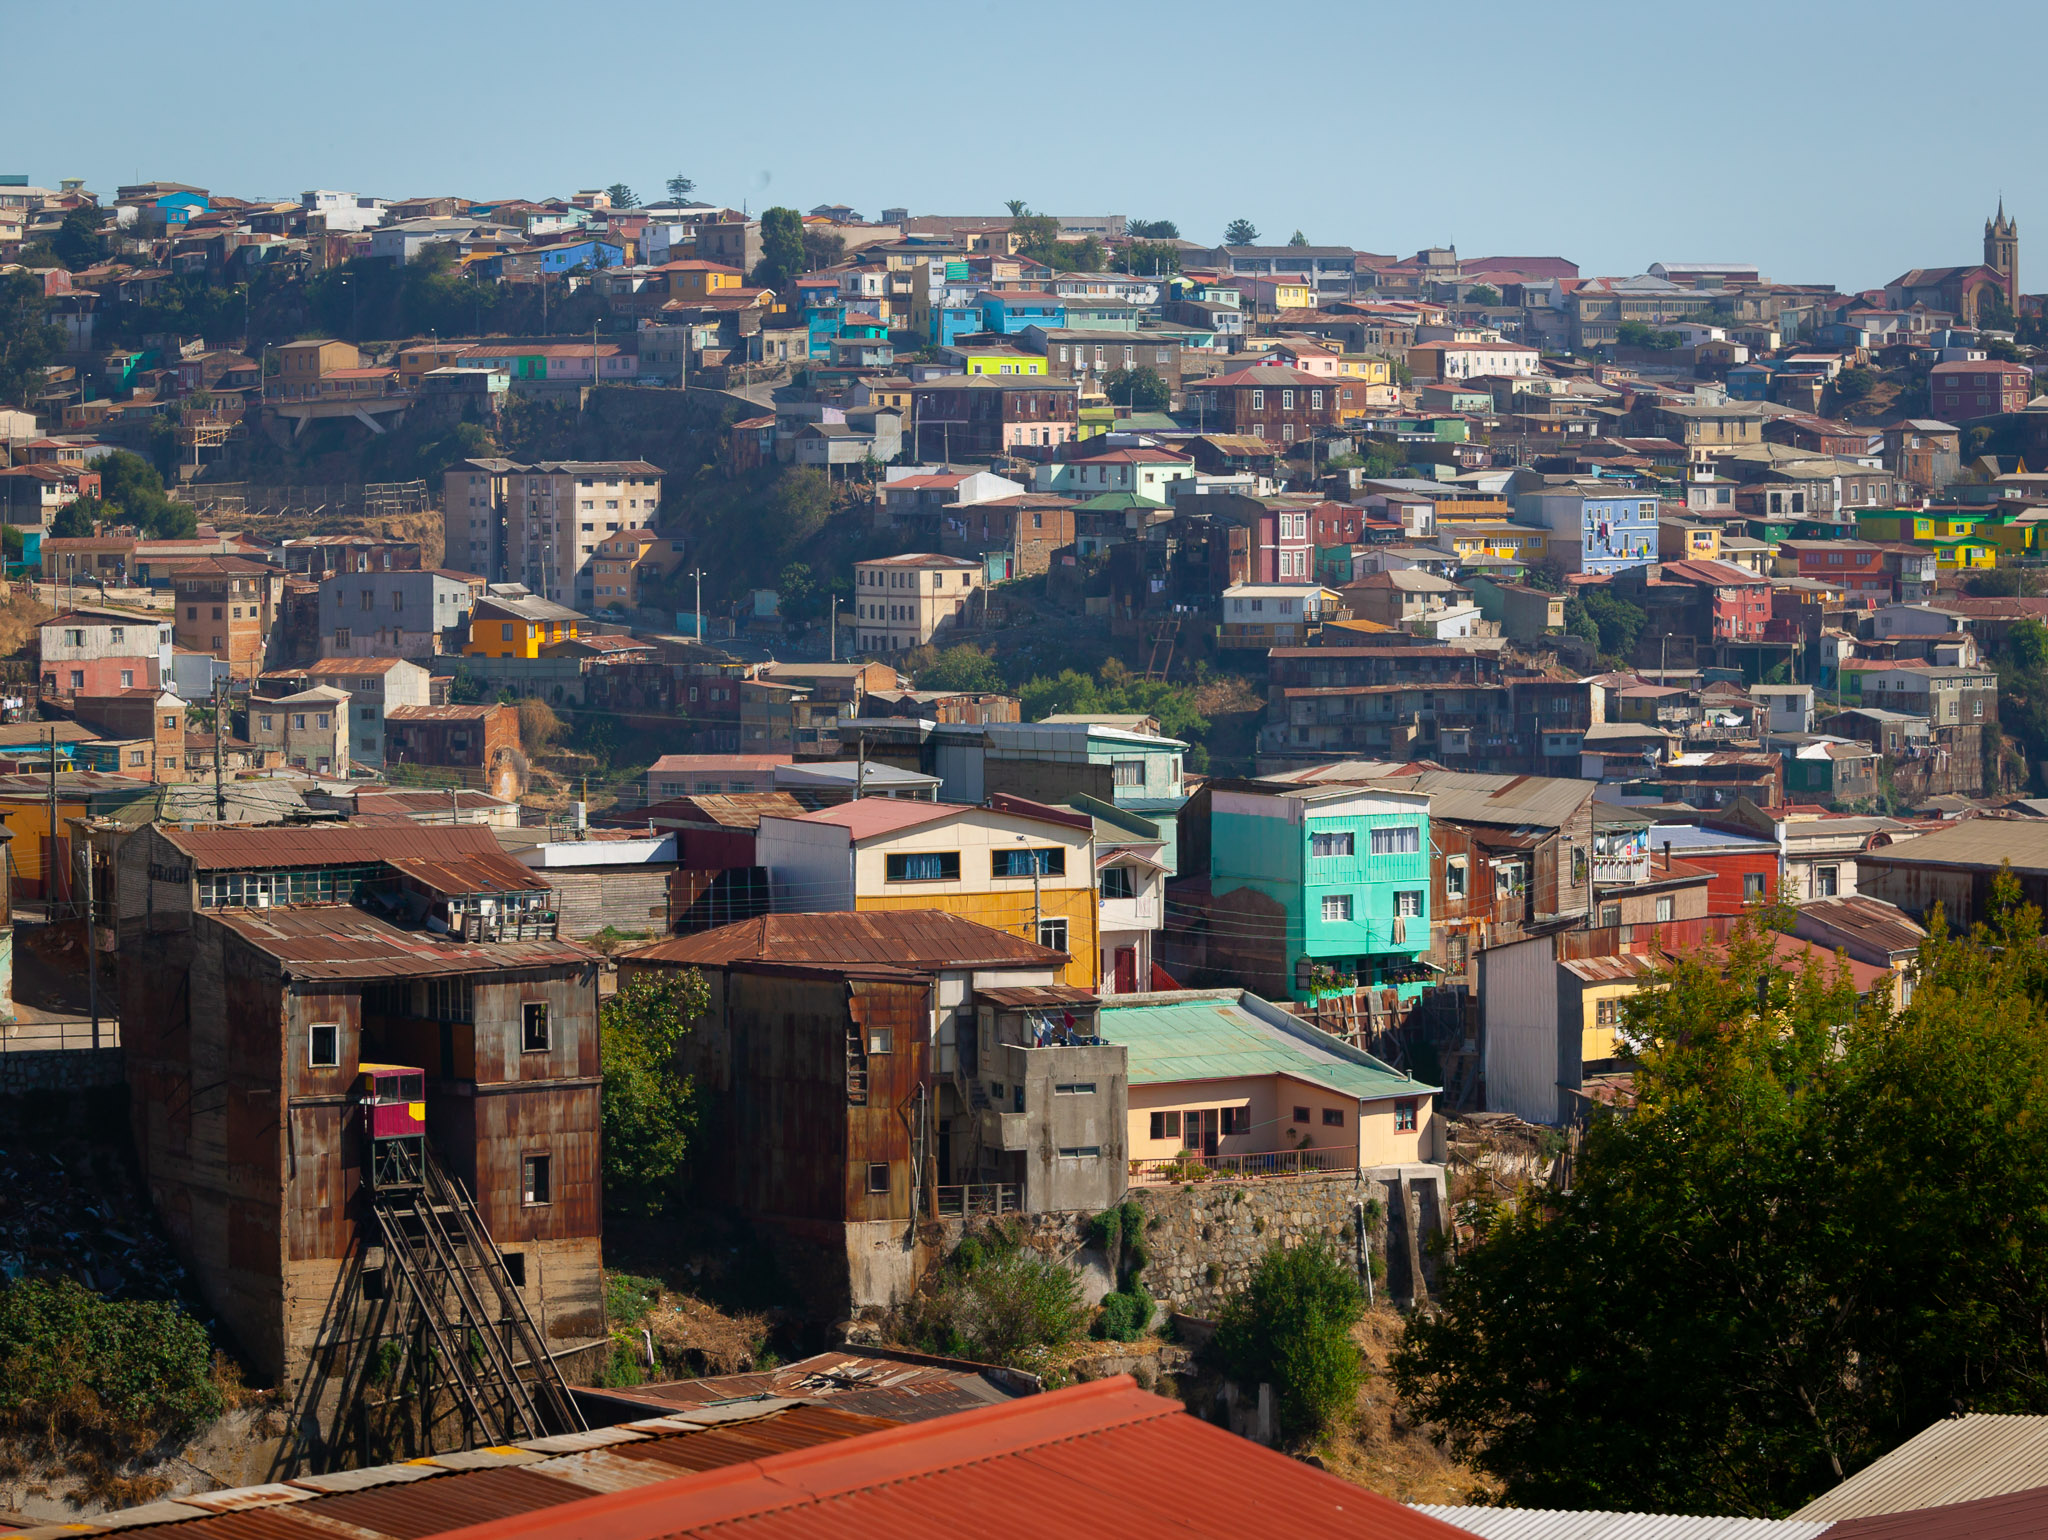 One of about 12 Valparaiso "ascensors" – where too steep for streets or stairs